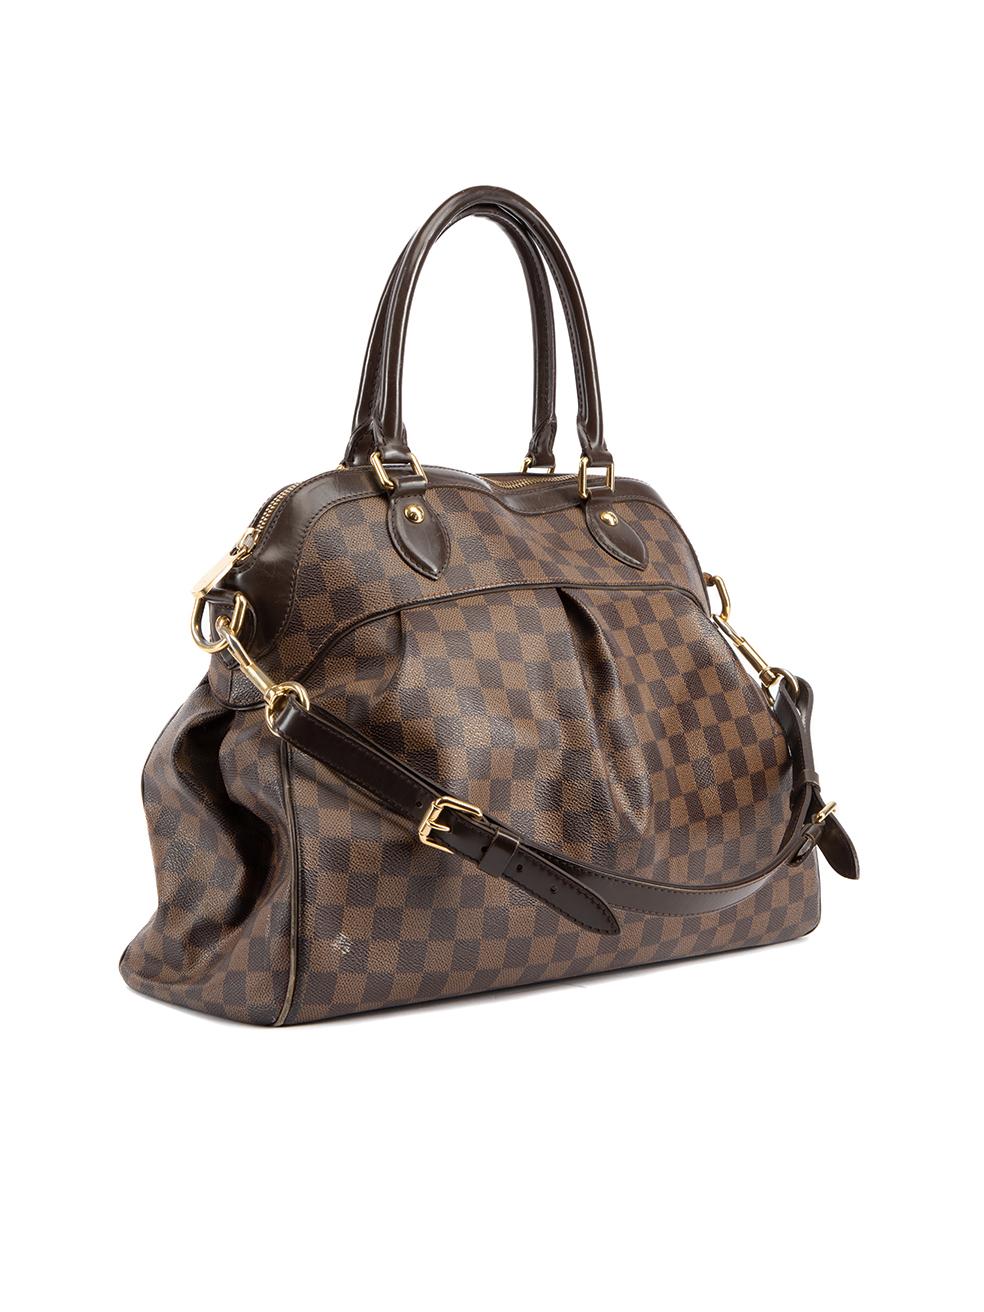 CONDITION is Good. Minor wear to bag is evident. Light wear/scuffs to the leather exterior, and significant signs of wear to the suede interior where pen marks/stains can be seen on this used Louis Vuitton designer resale item. Details 2010 Brown